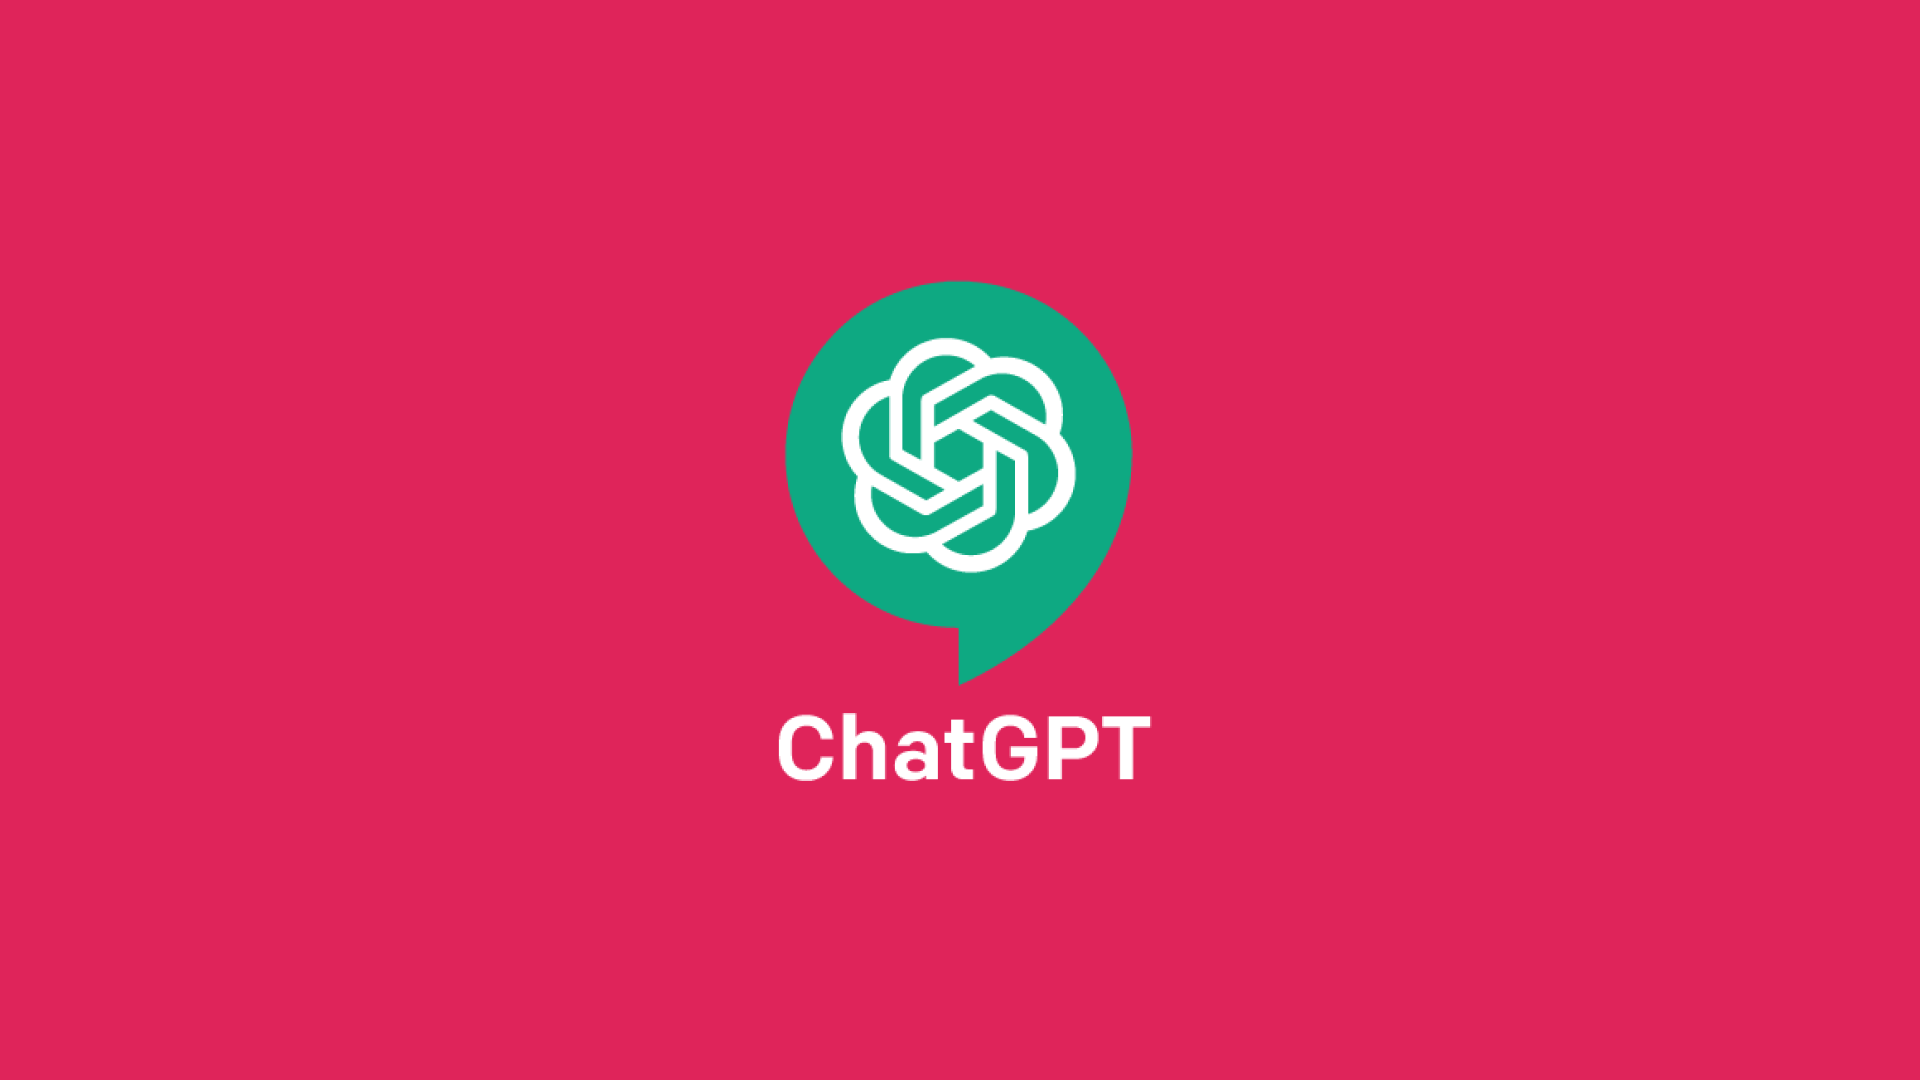 How to use ChatGPT for productivity